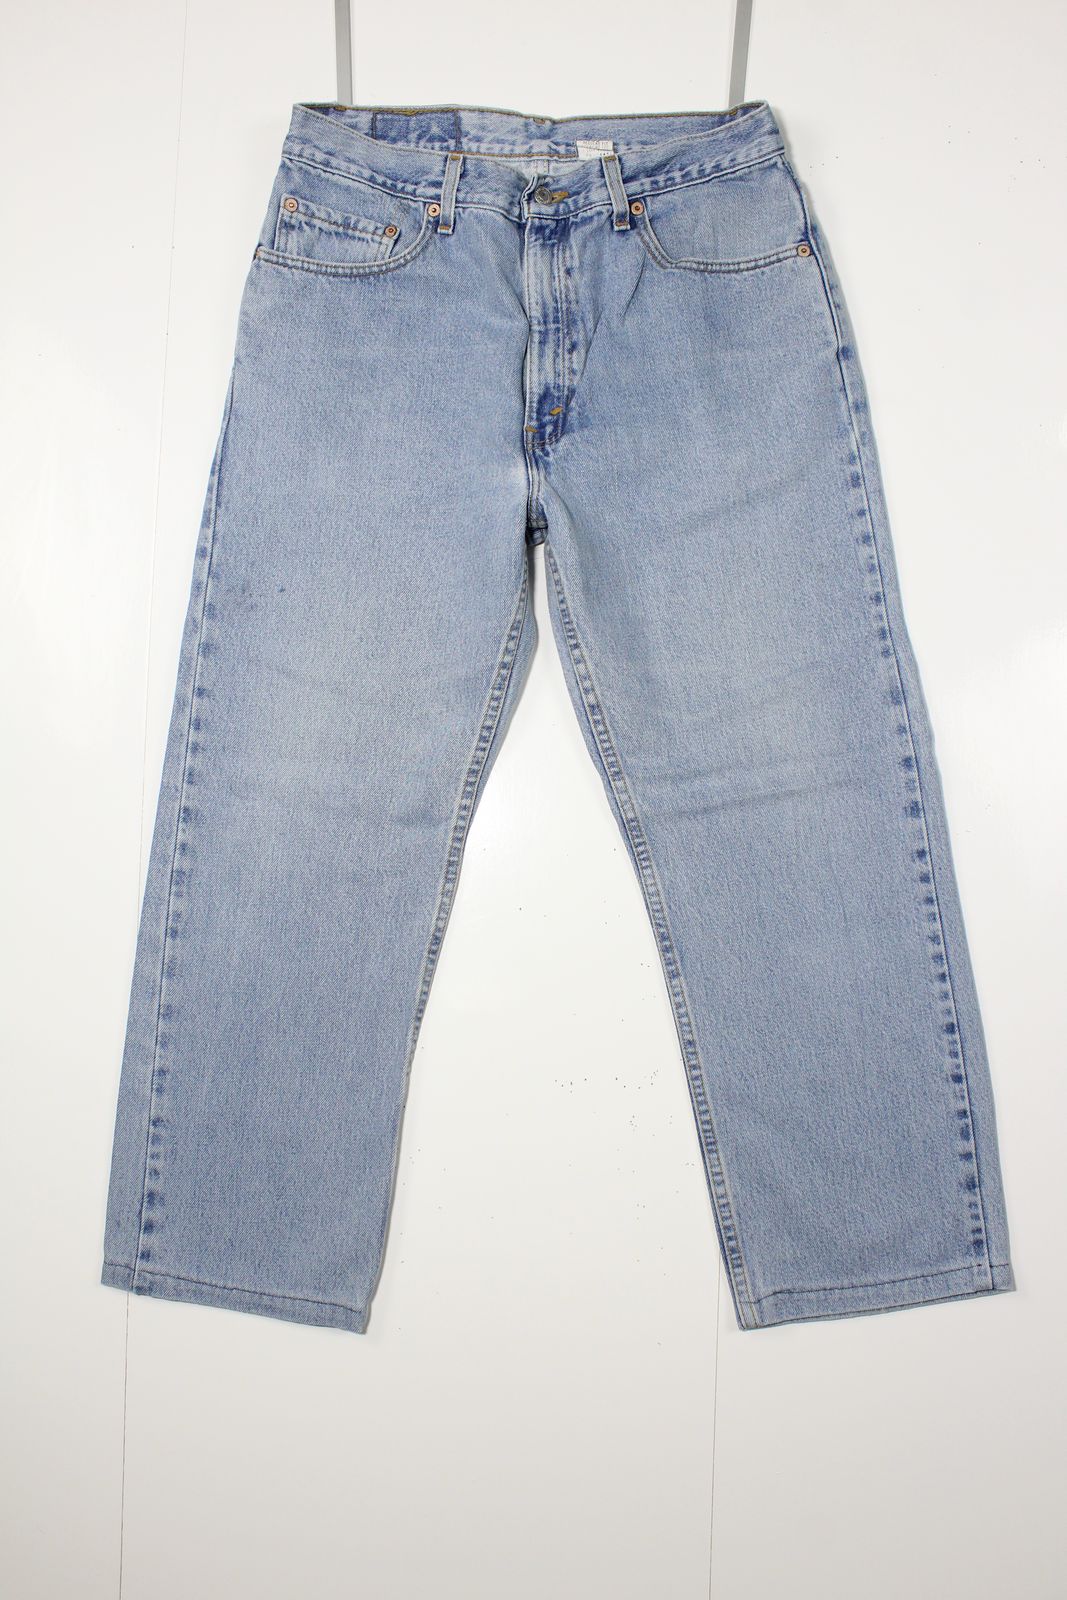 Levi's 505 Relaxed Fit Made In USA W34 L30 Jeans Vintage